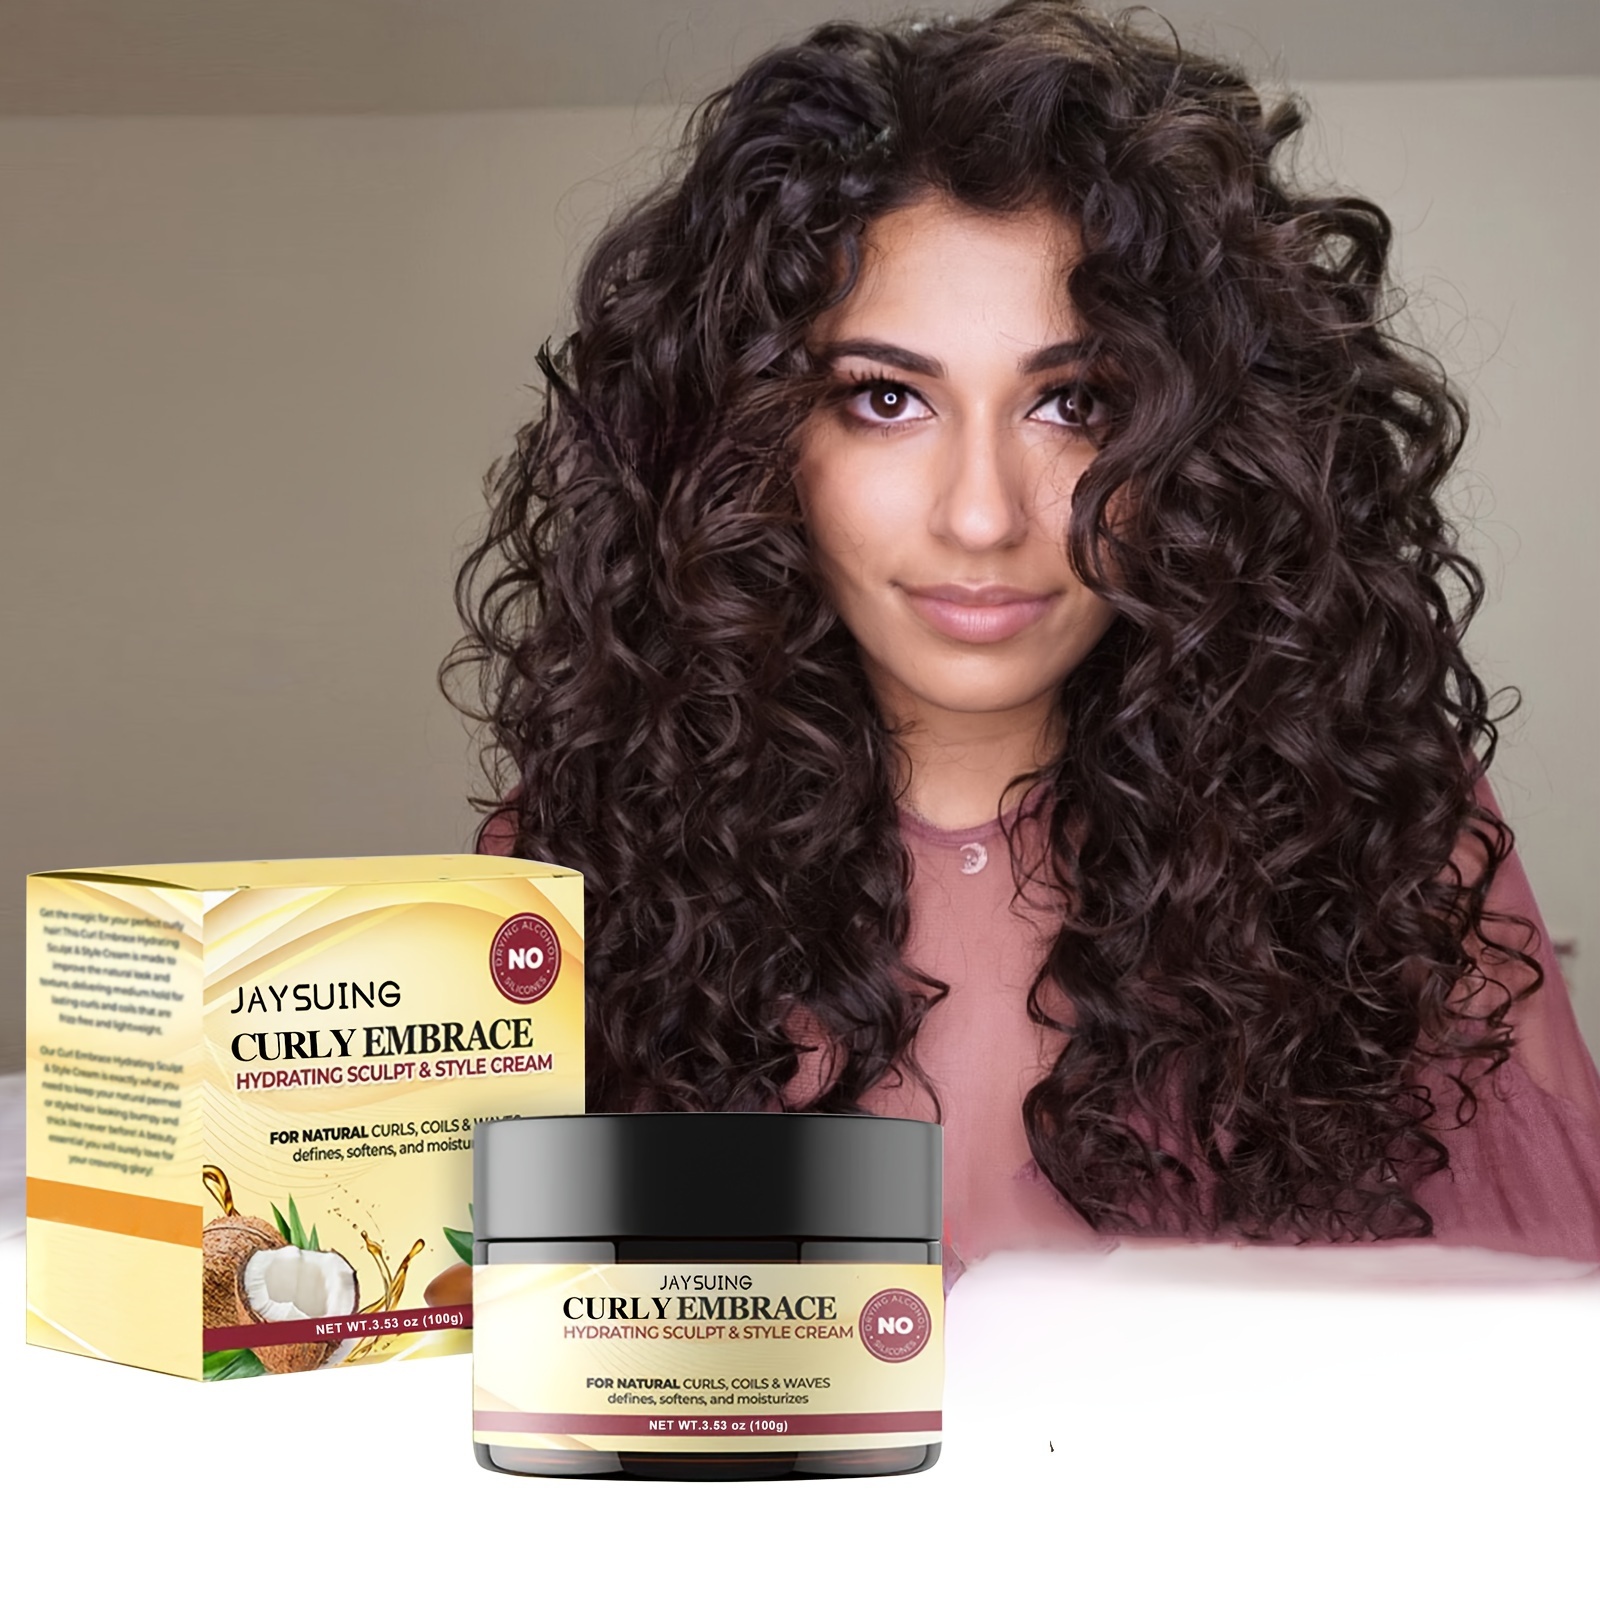 

100g Curly Embrace Hydrating Sculpt & Style Cream, For Natural & Waves, Anti-frizz With Argan & Coconut Oil, Contains Glycerin, Panthenol, Squalane For Moisture & Shine (plant Squalane)